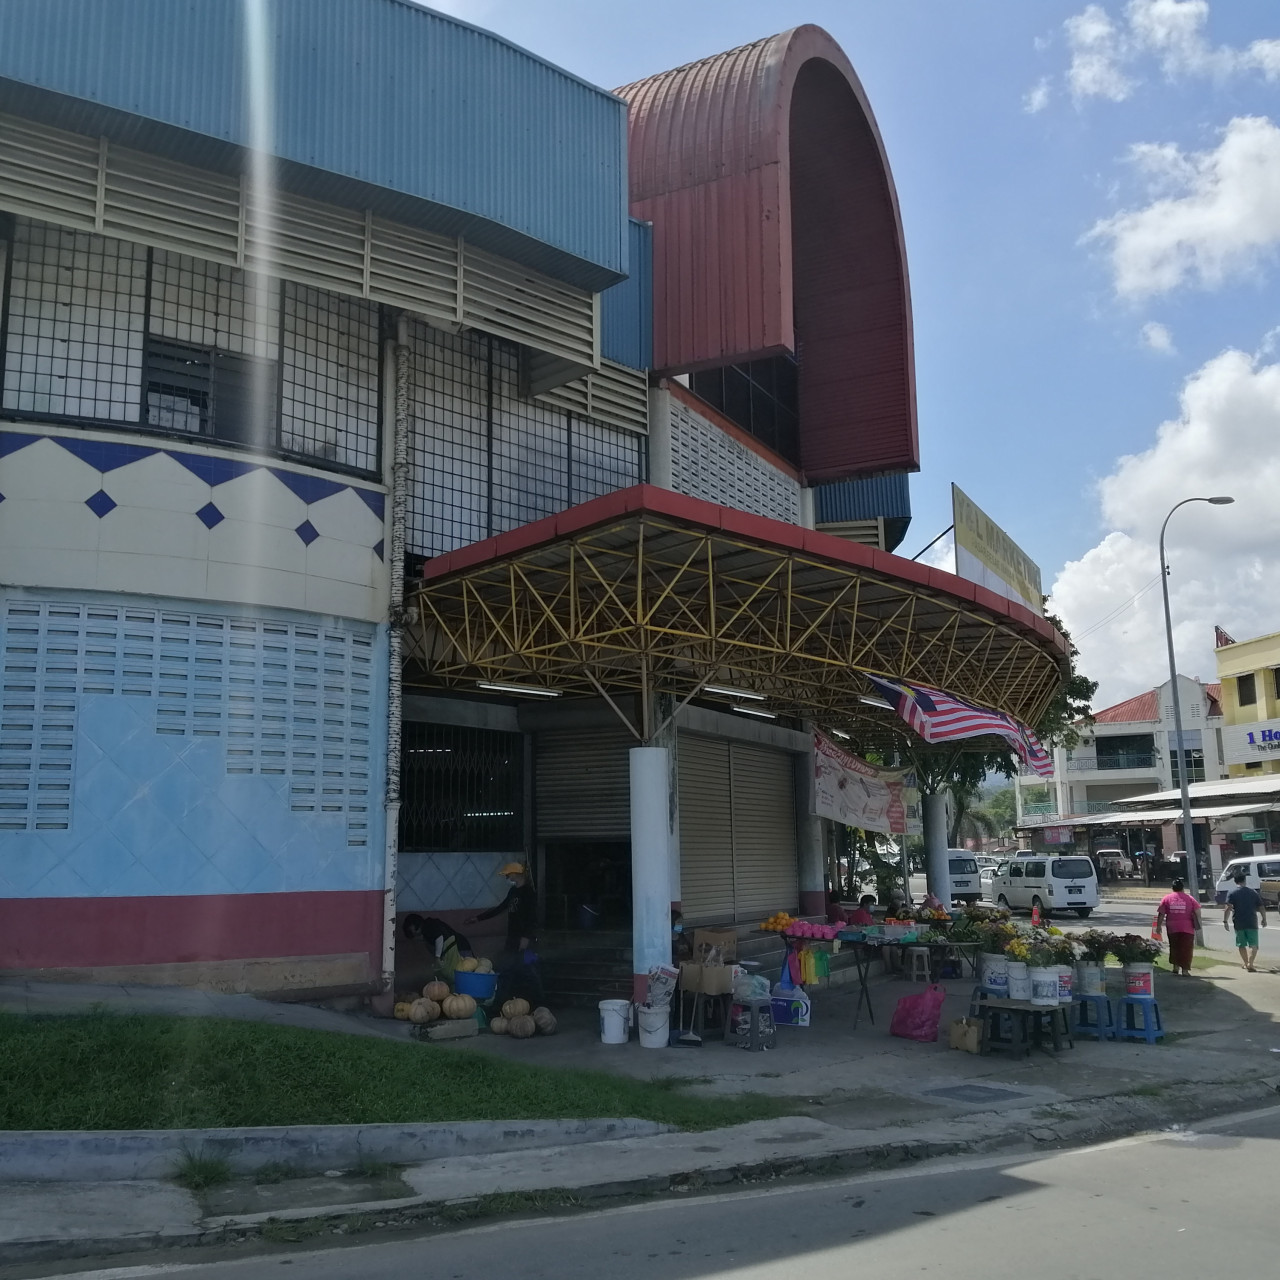 The Inanam market building in town. – The Vibes pic, September 24, 2020